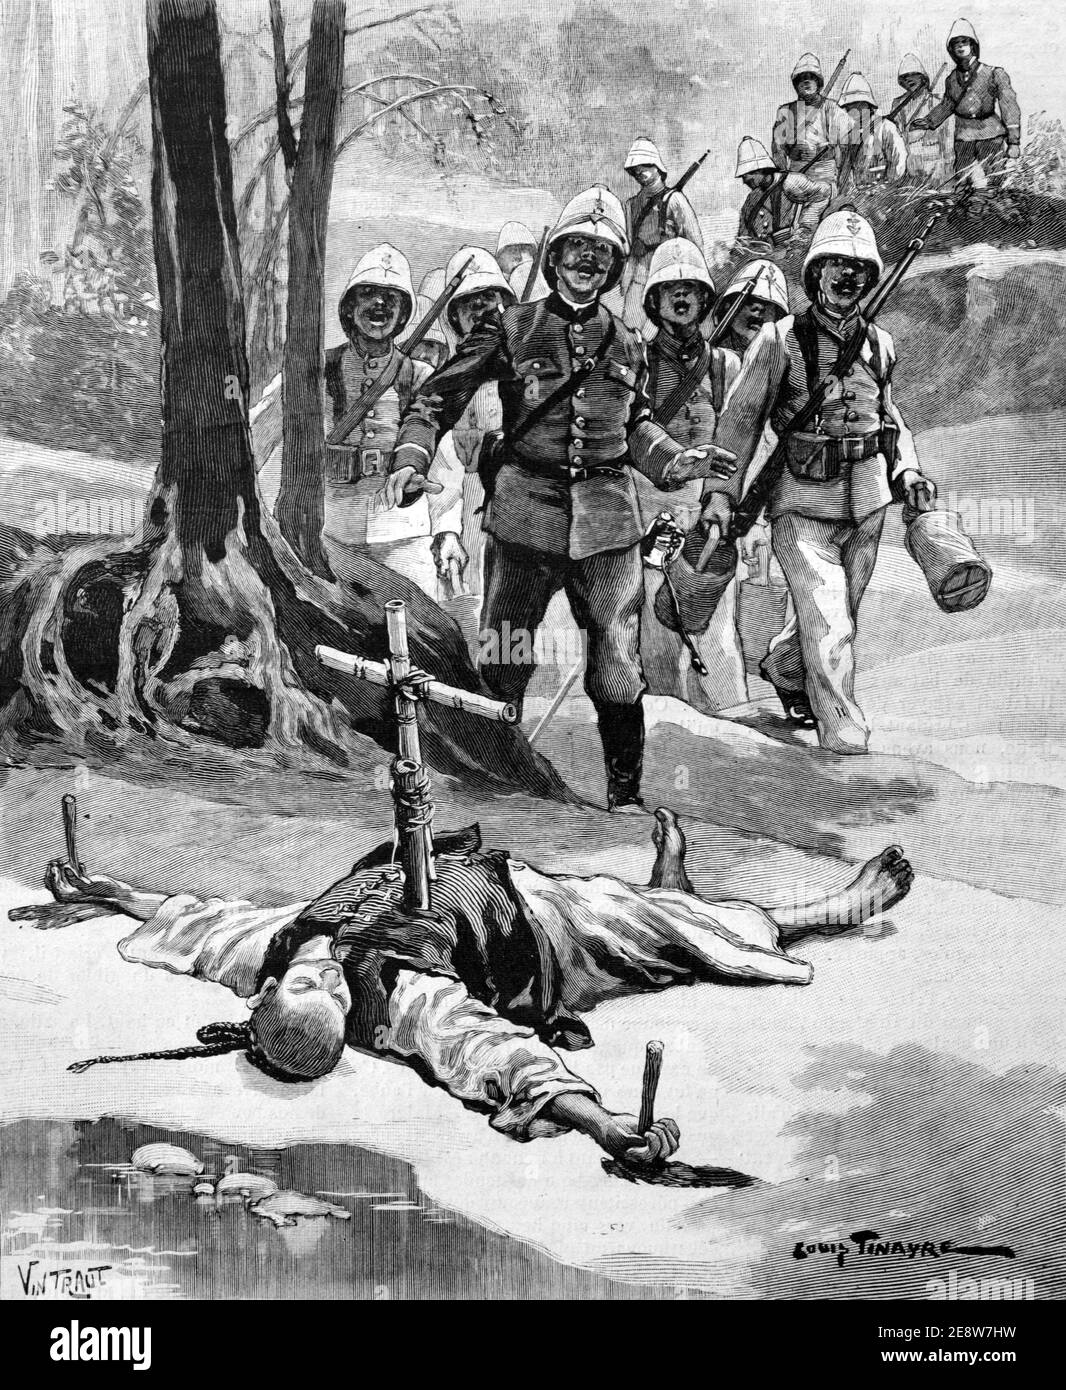 Chinese Christian Murdered or Killed during the Boxer Rebellion, Boxer Uprising or Yihetuan Movement (1899-1901), a Nationalist, Anti-Imperialist, Anti-foreign and Anti-Christian Rebellion China 1901. Vintage Illustration or Engraving Stock Photo